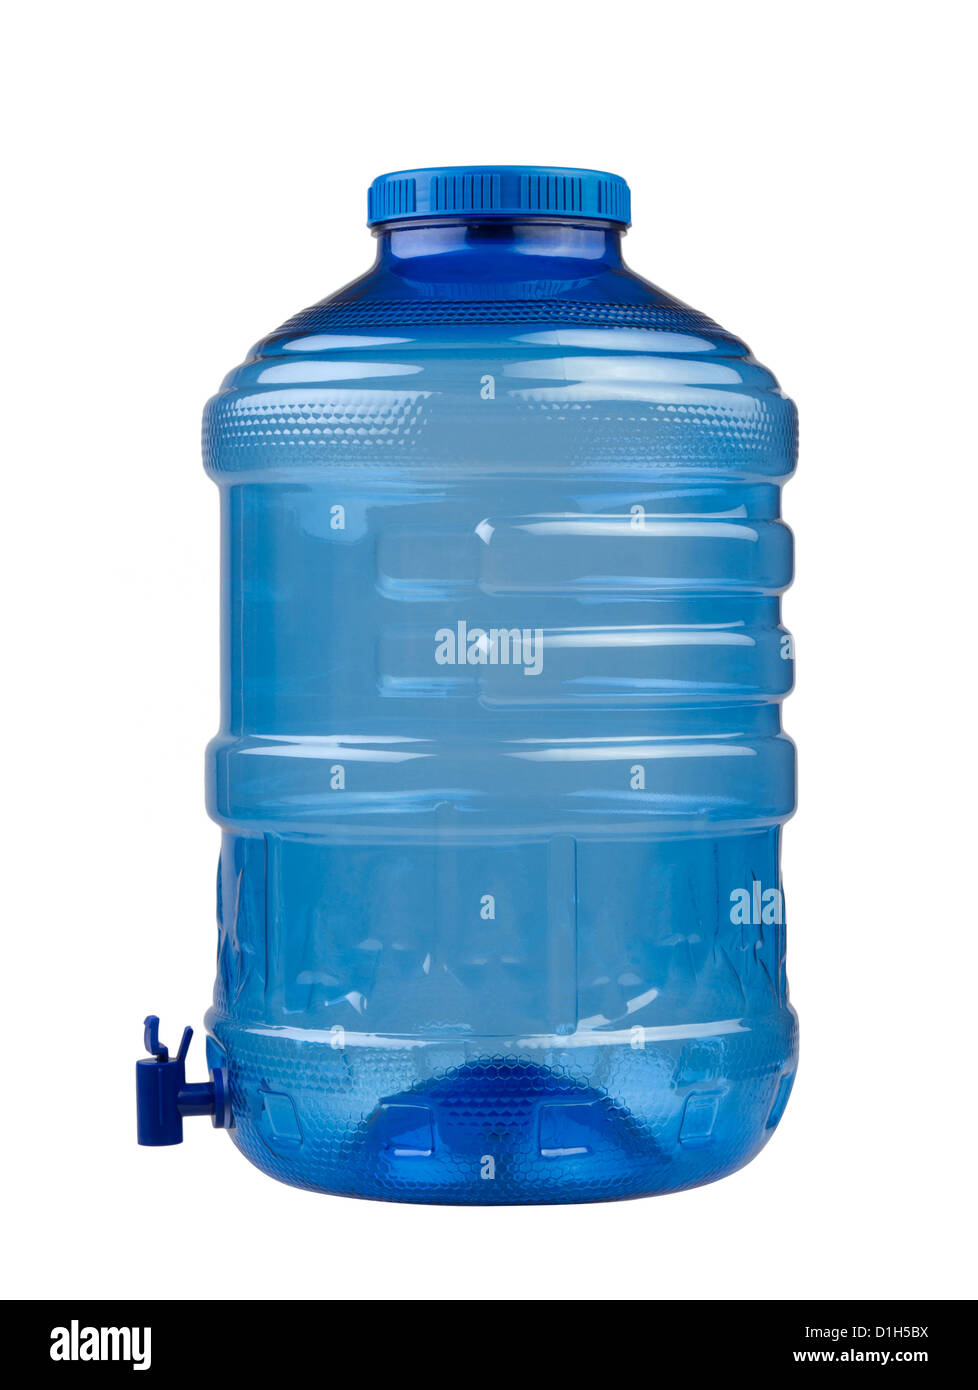 https://c8.alamy.com/comp/D1H5BX/empty-blue-drinking-water-container-isolated-on-white-background-D1H5BX.jpg